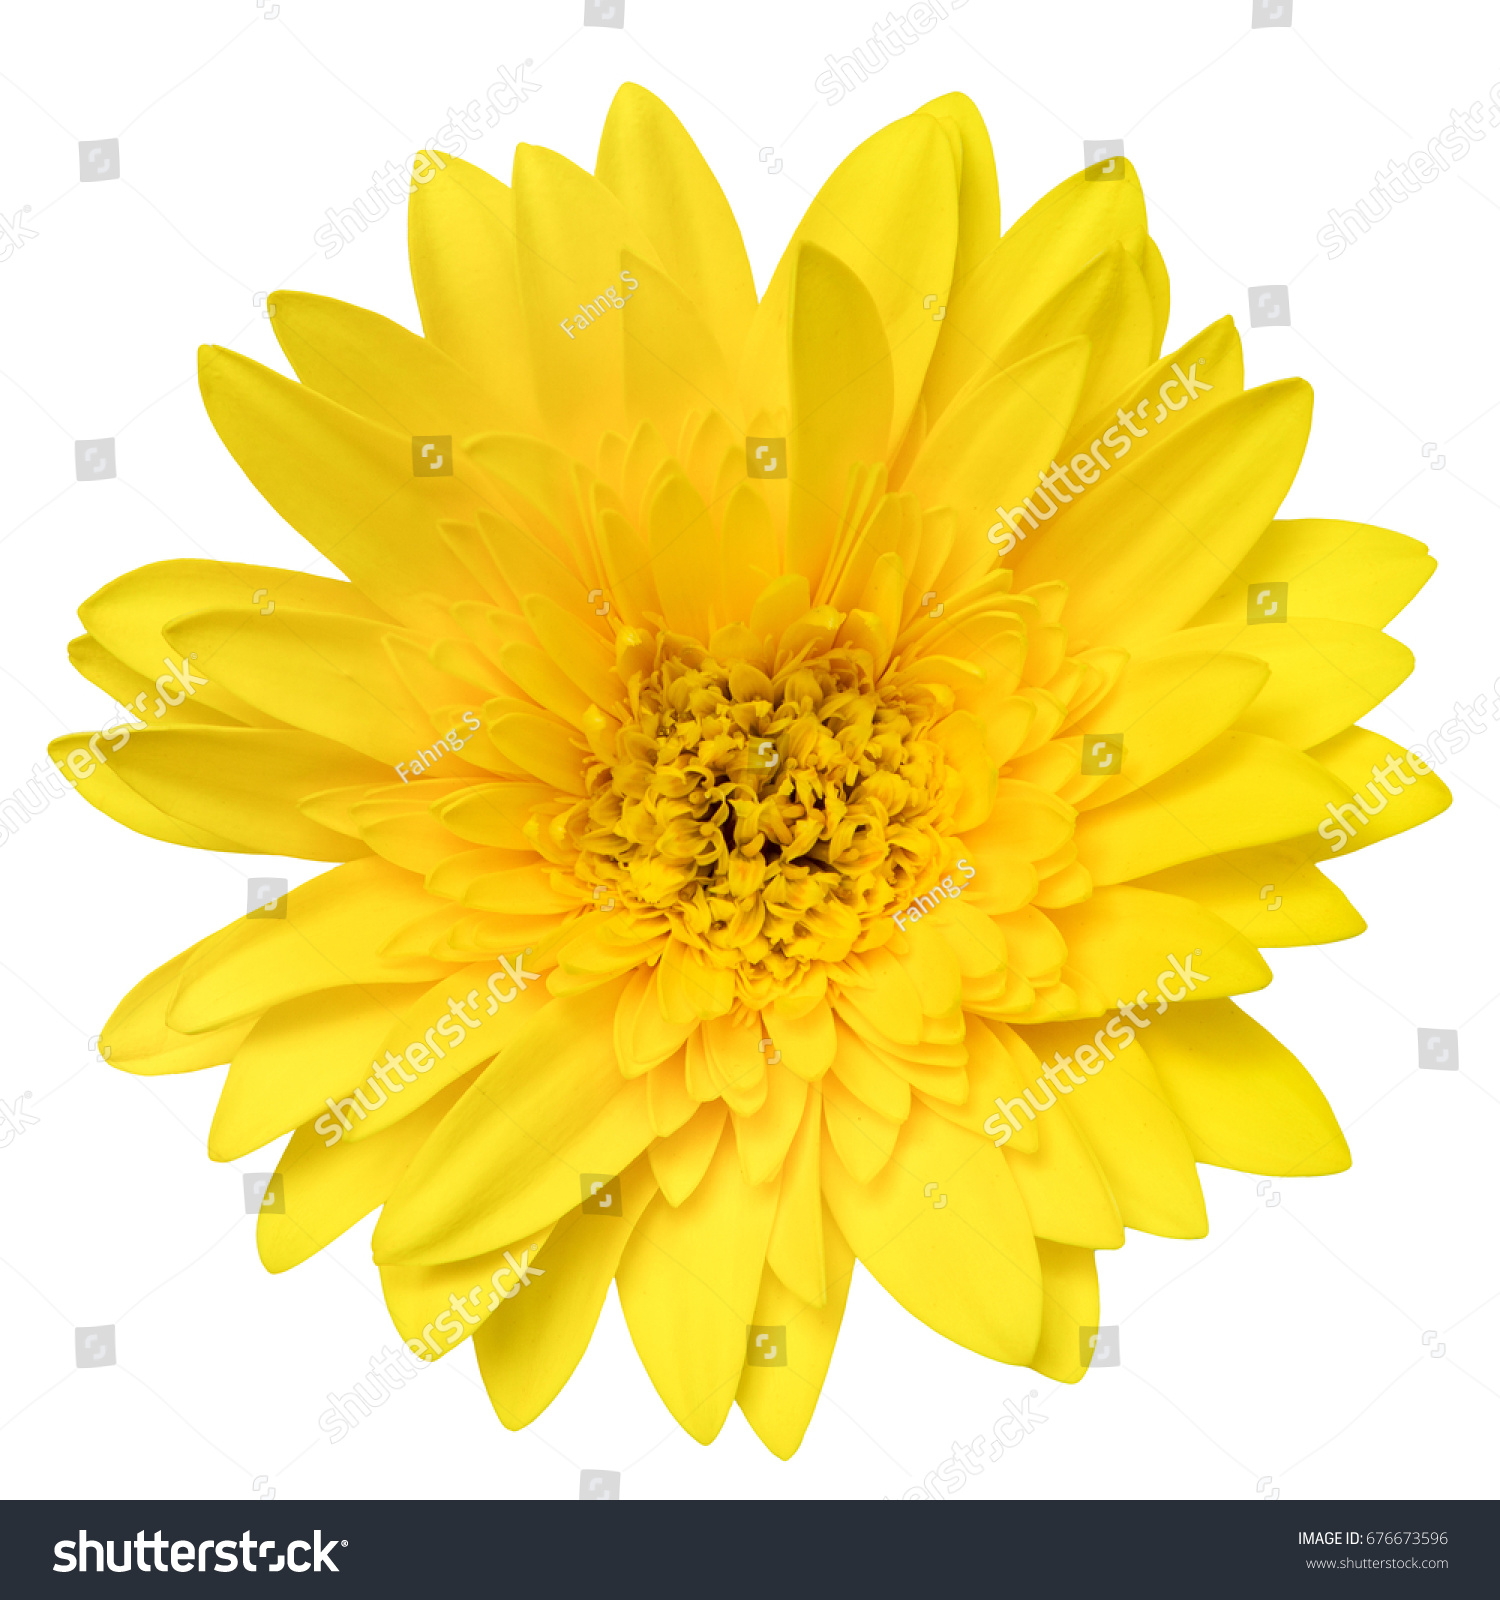 Top View Yellow Gerbera Flower Isolated Stock Photo 676673596 ...